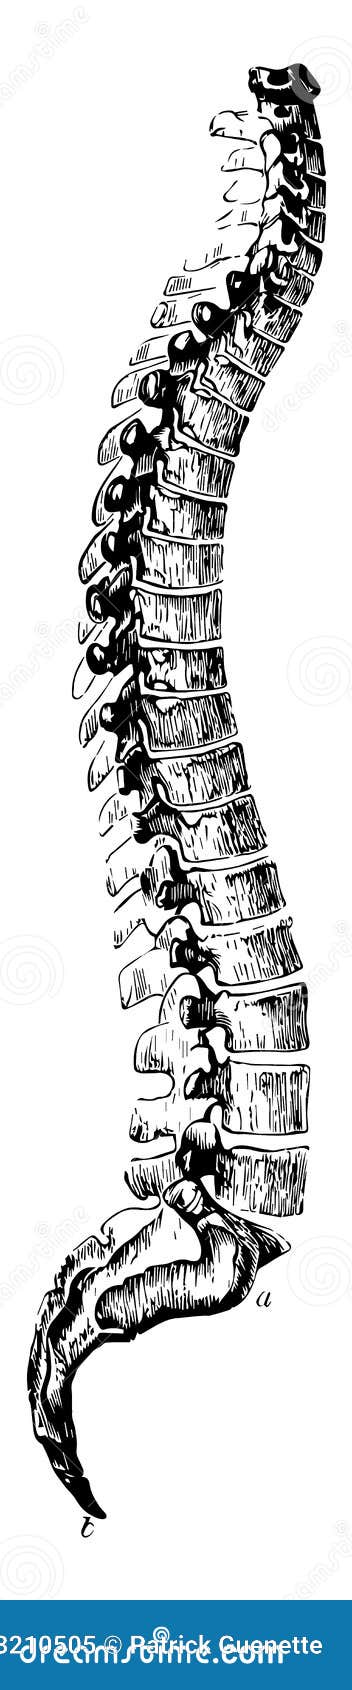 The Human Spine Drawn By Lines On White Background Stock Illustration   Download Image Now  iStock